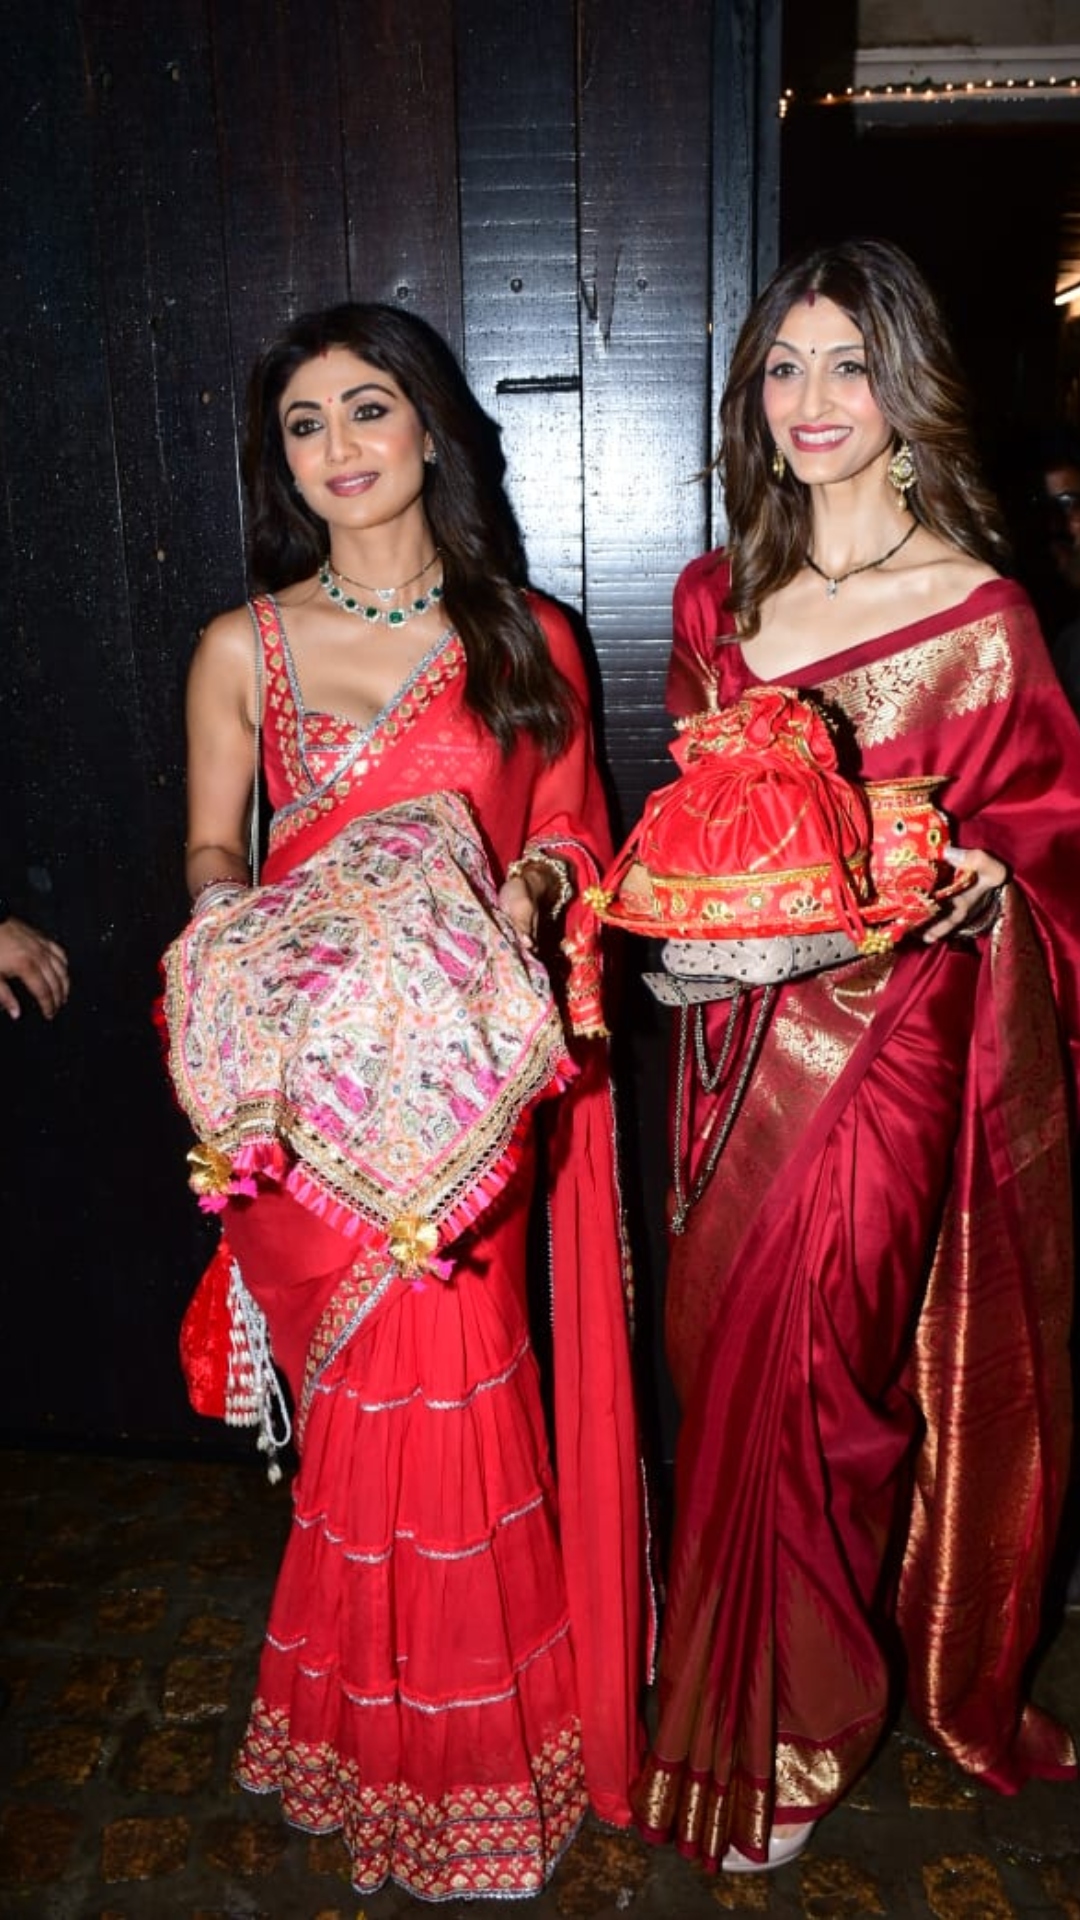 Karwa Chauth celebration at Anil Kapoor's house: Shilpa Shetty, Maheep &amp; others grace the occasion